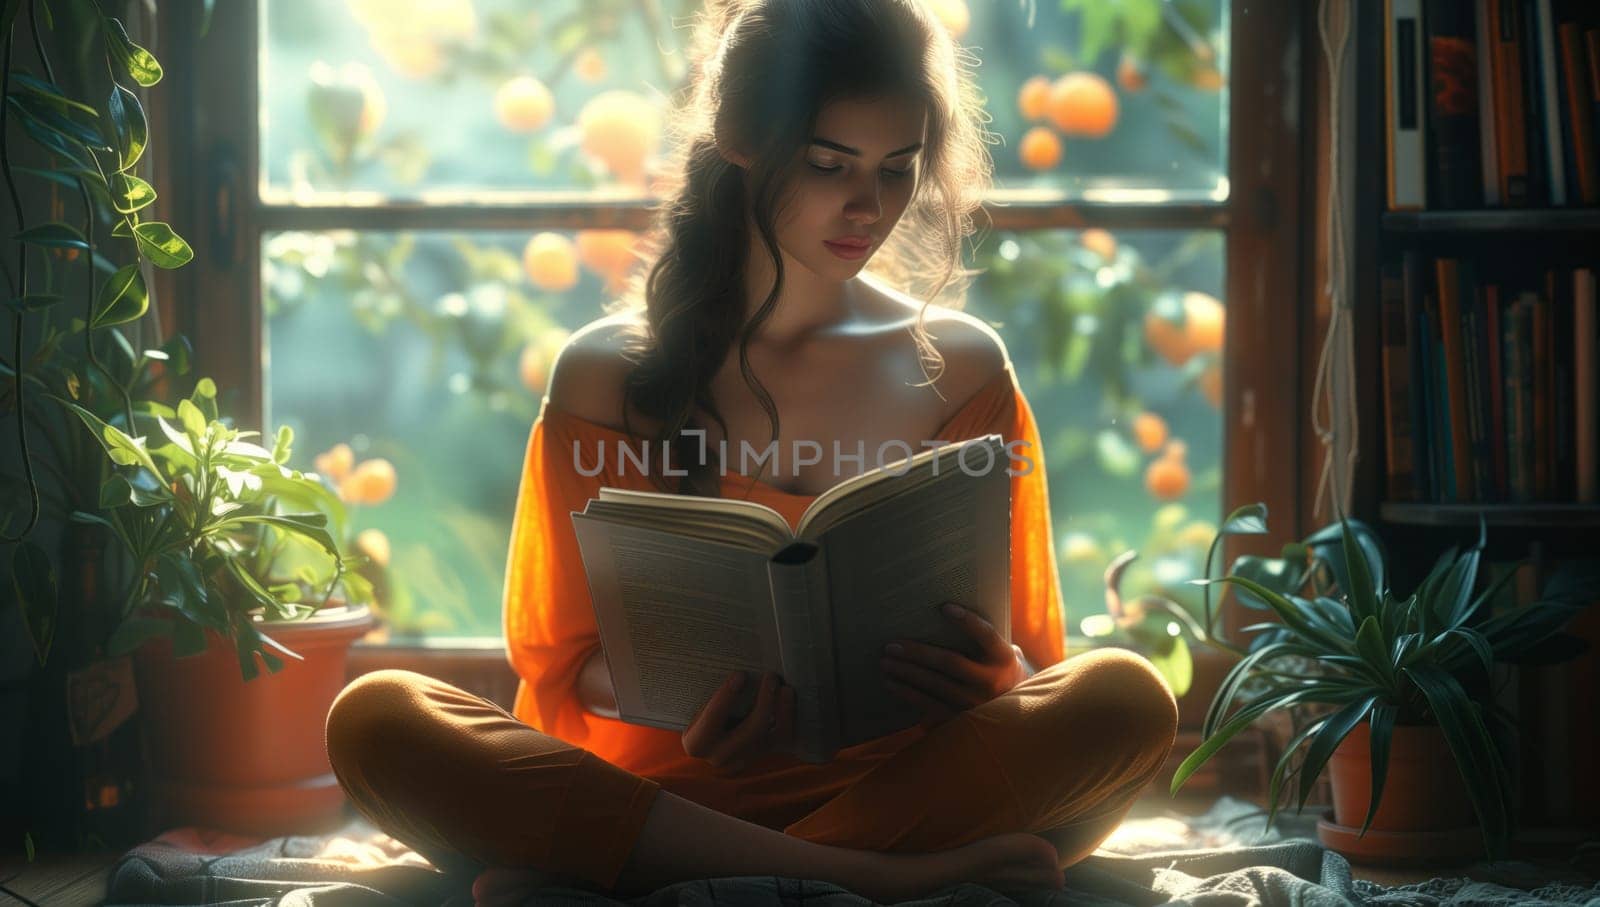 A woman leisurely sits on the floor by a window, reading a book. A houseplant sits in a flowerpot nearby while a tree can be seen outside